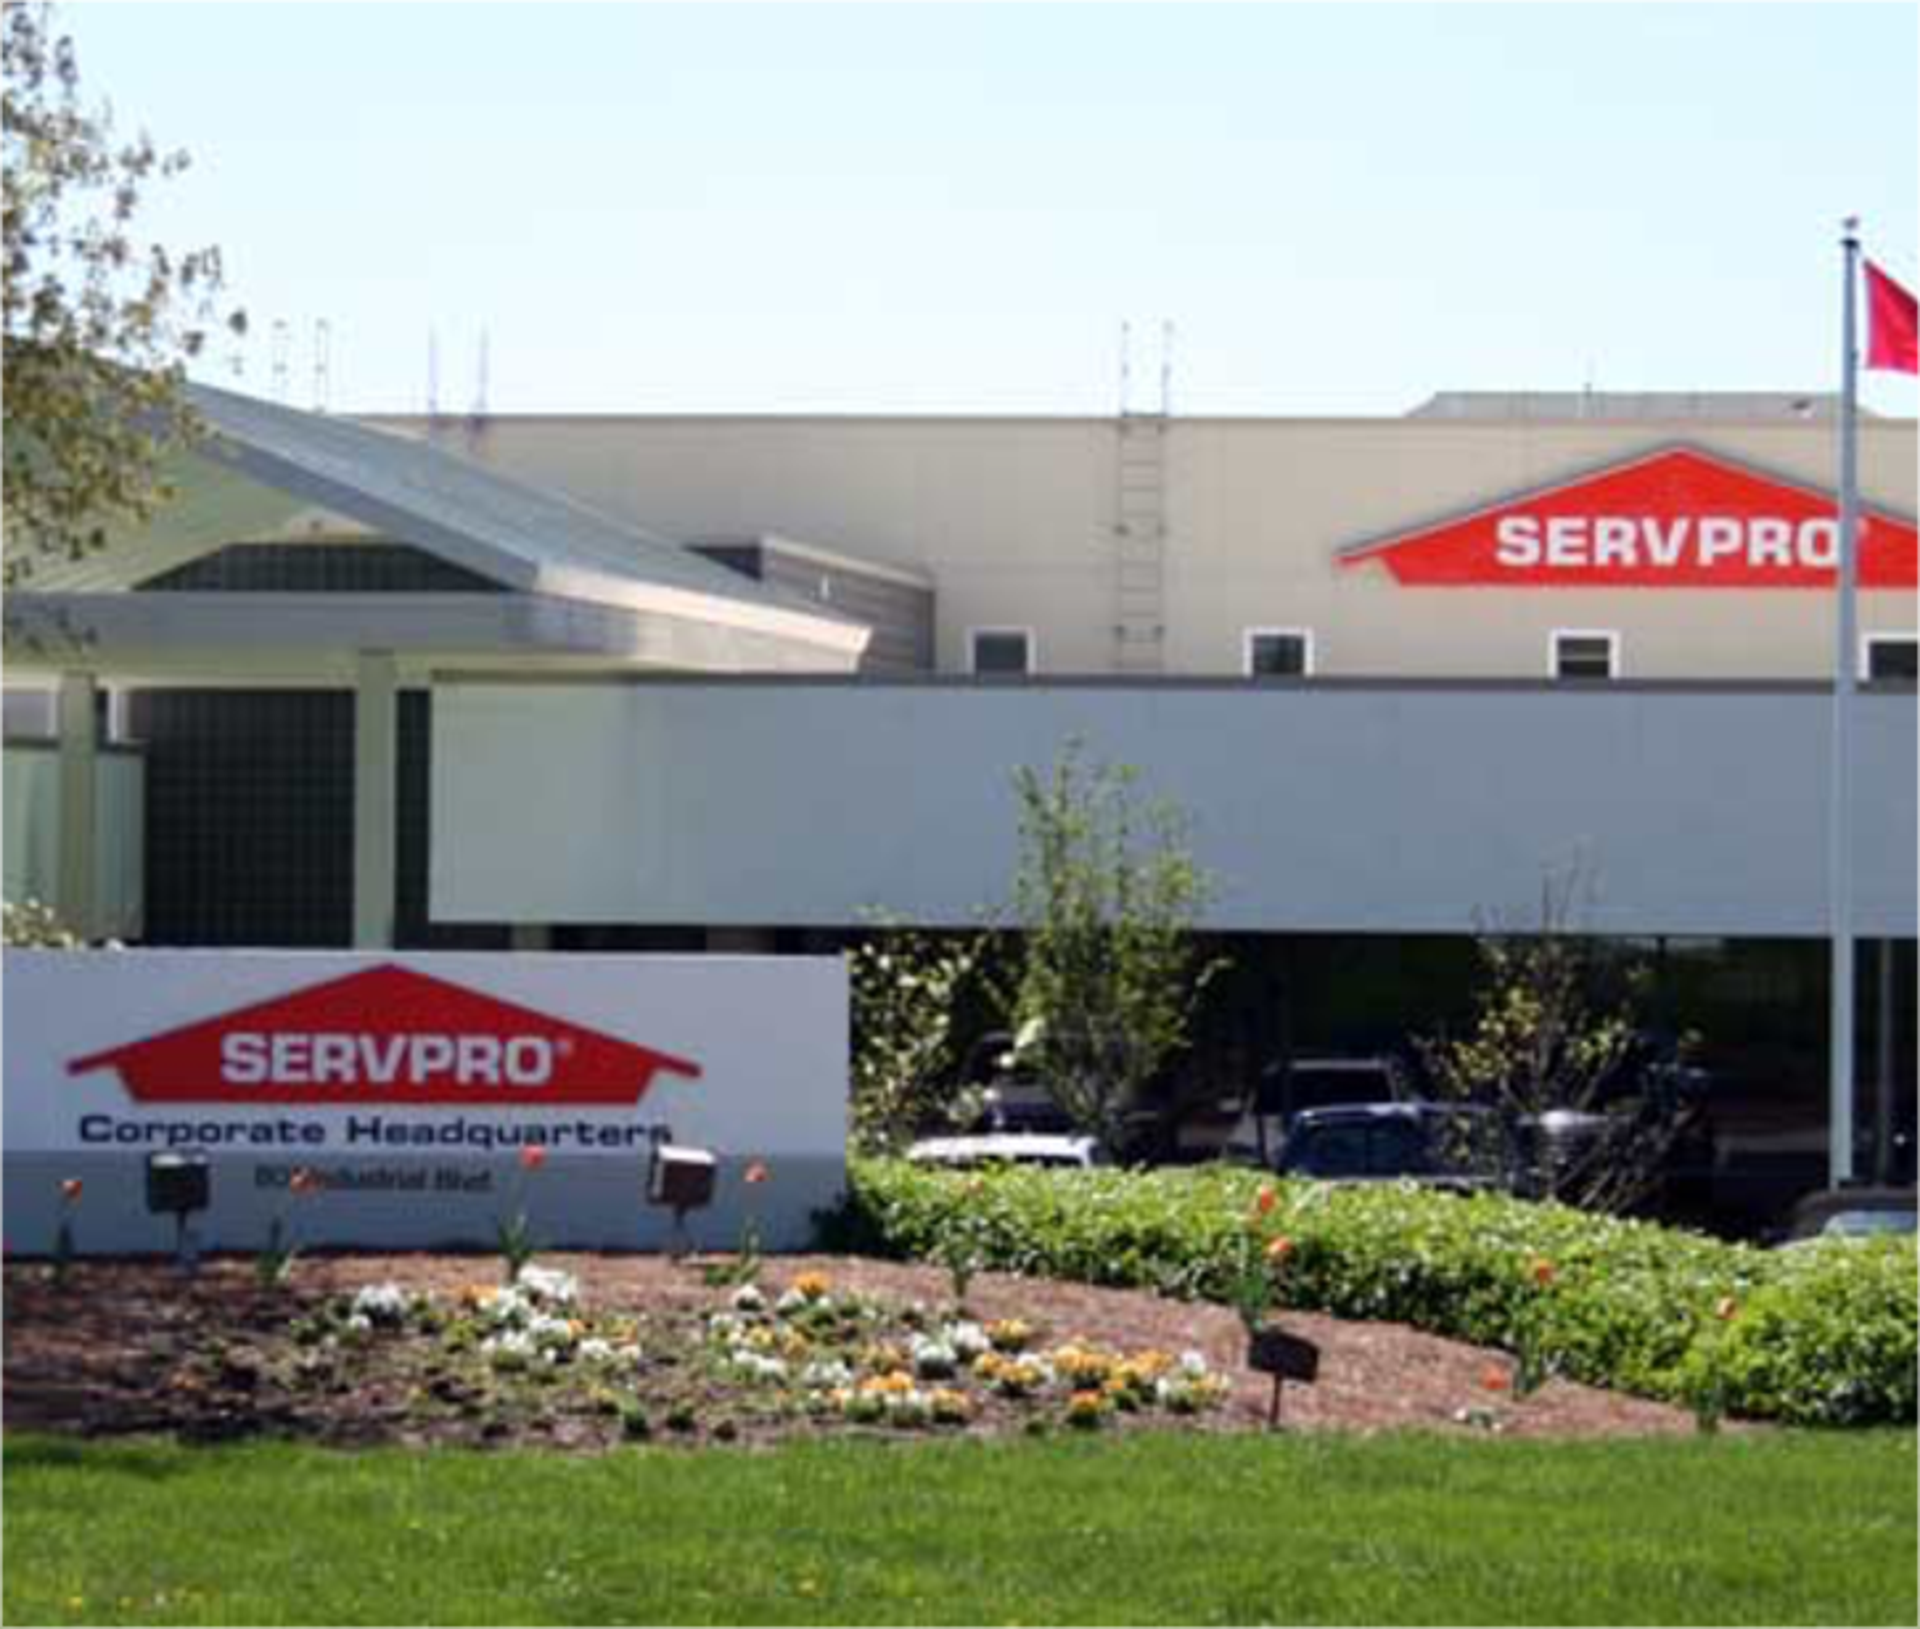 outside of SERVPRO corporate headquarters